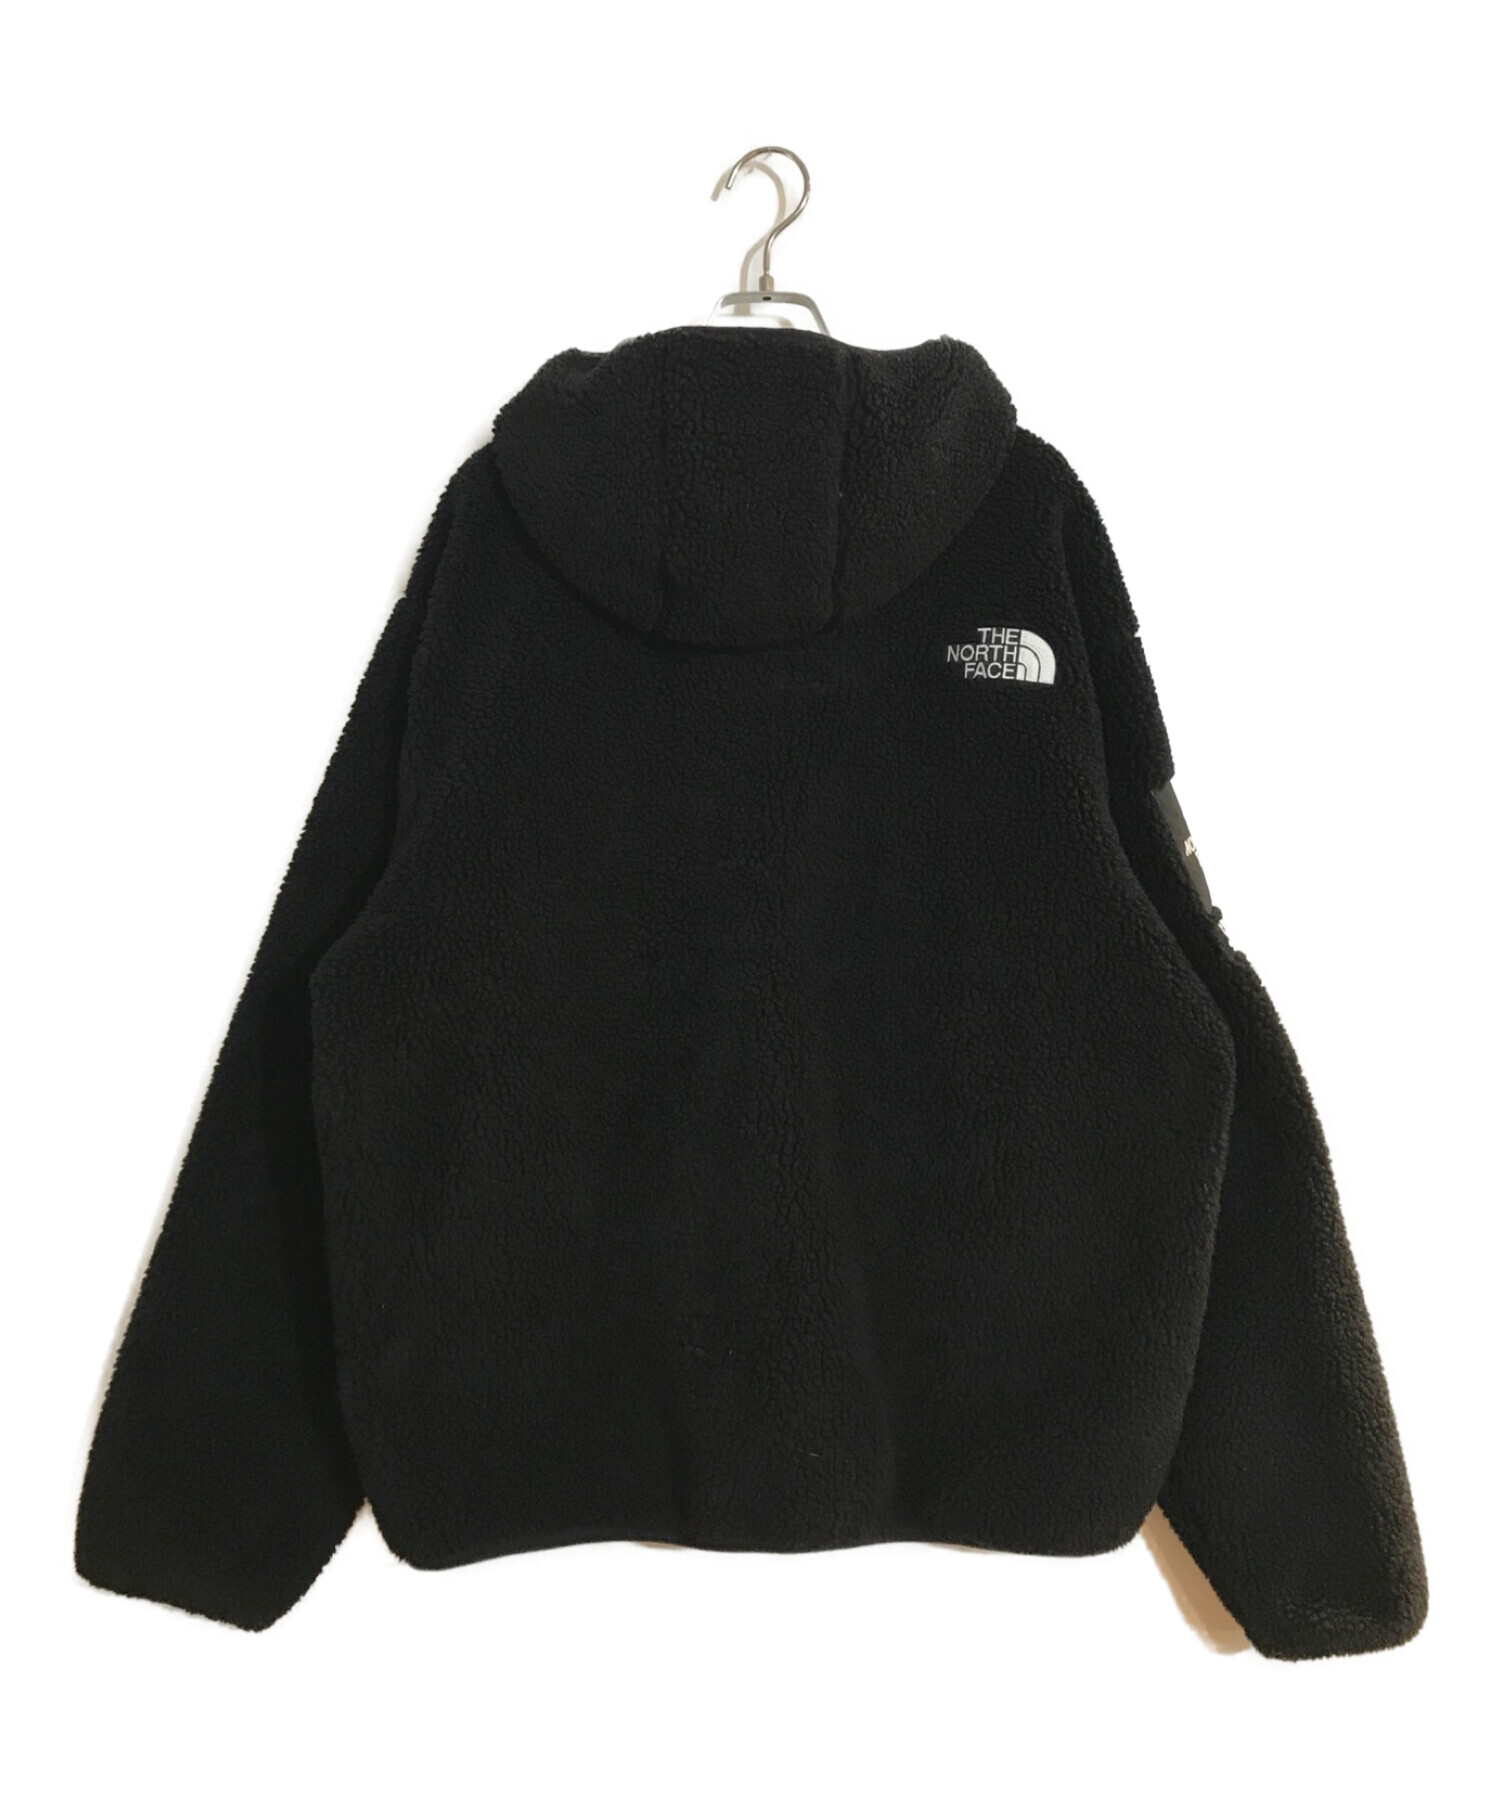 Supreme The North Face フリース   限定値下げ